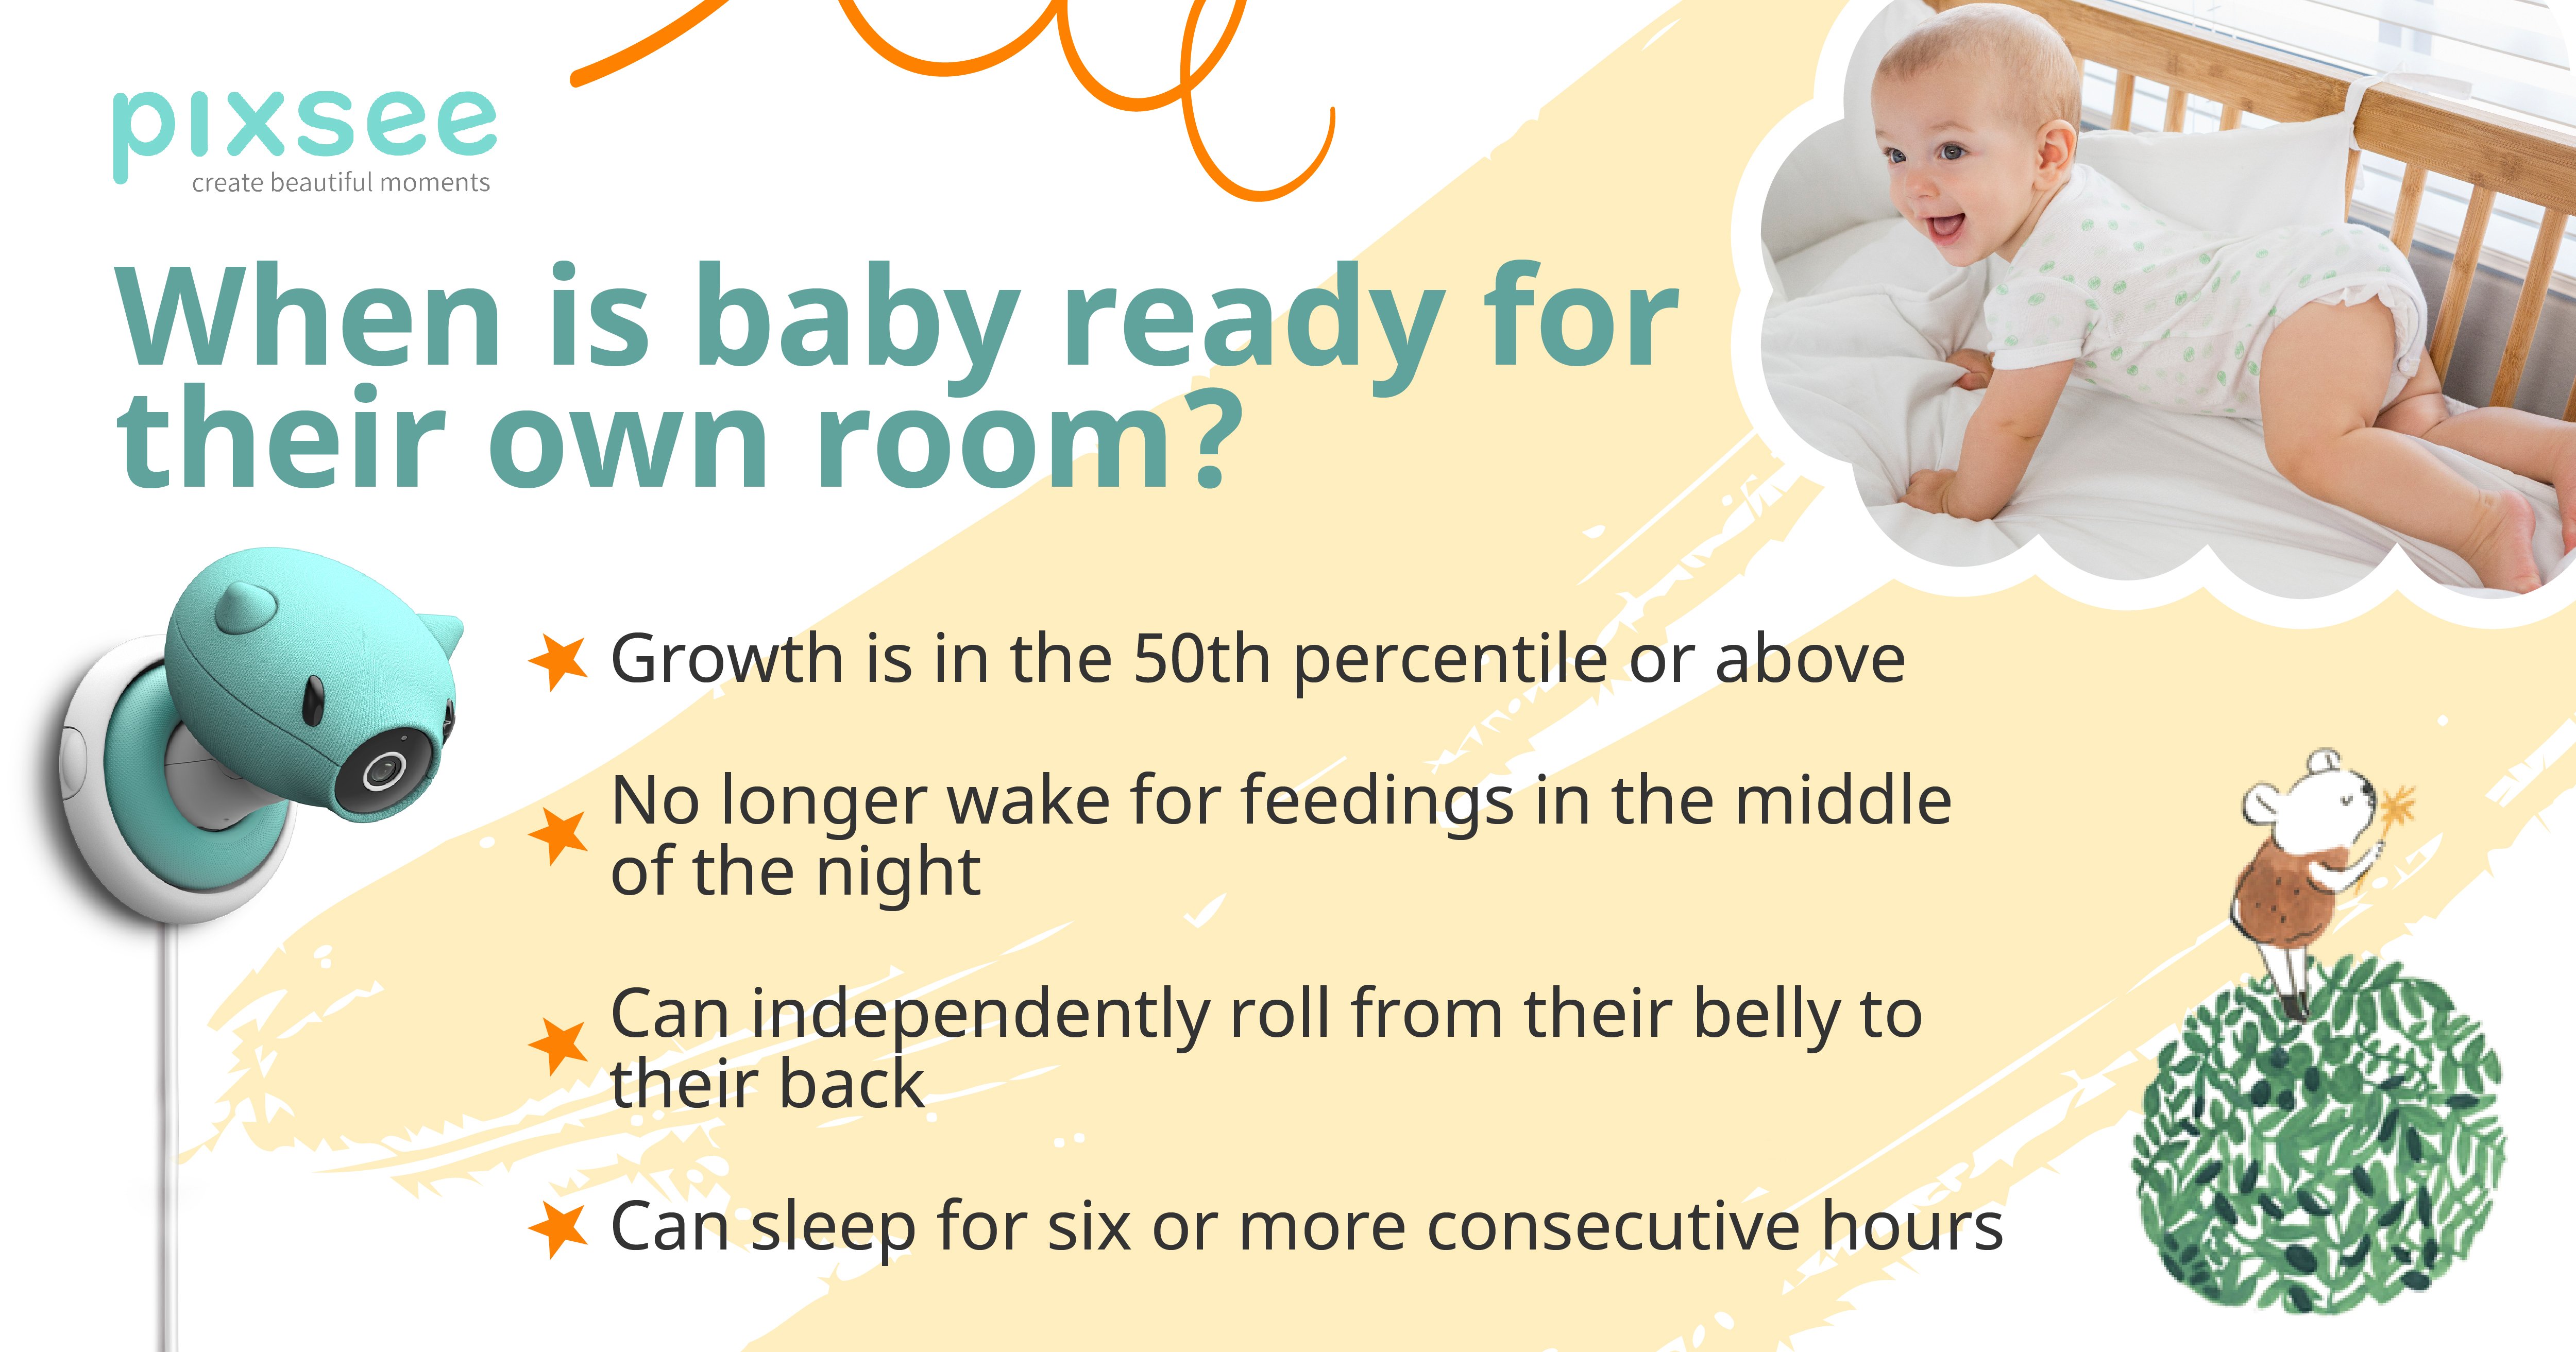 When is Baby Ready for Own Room